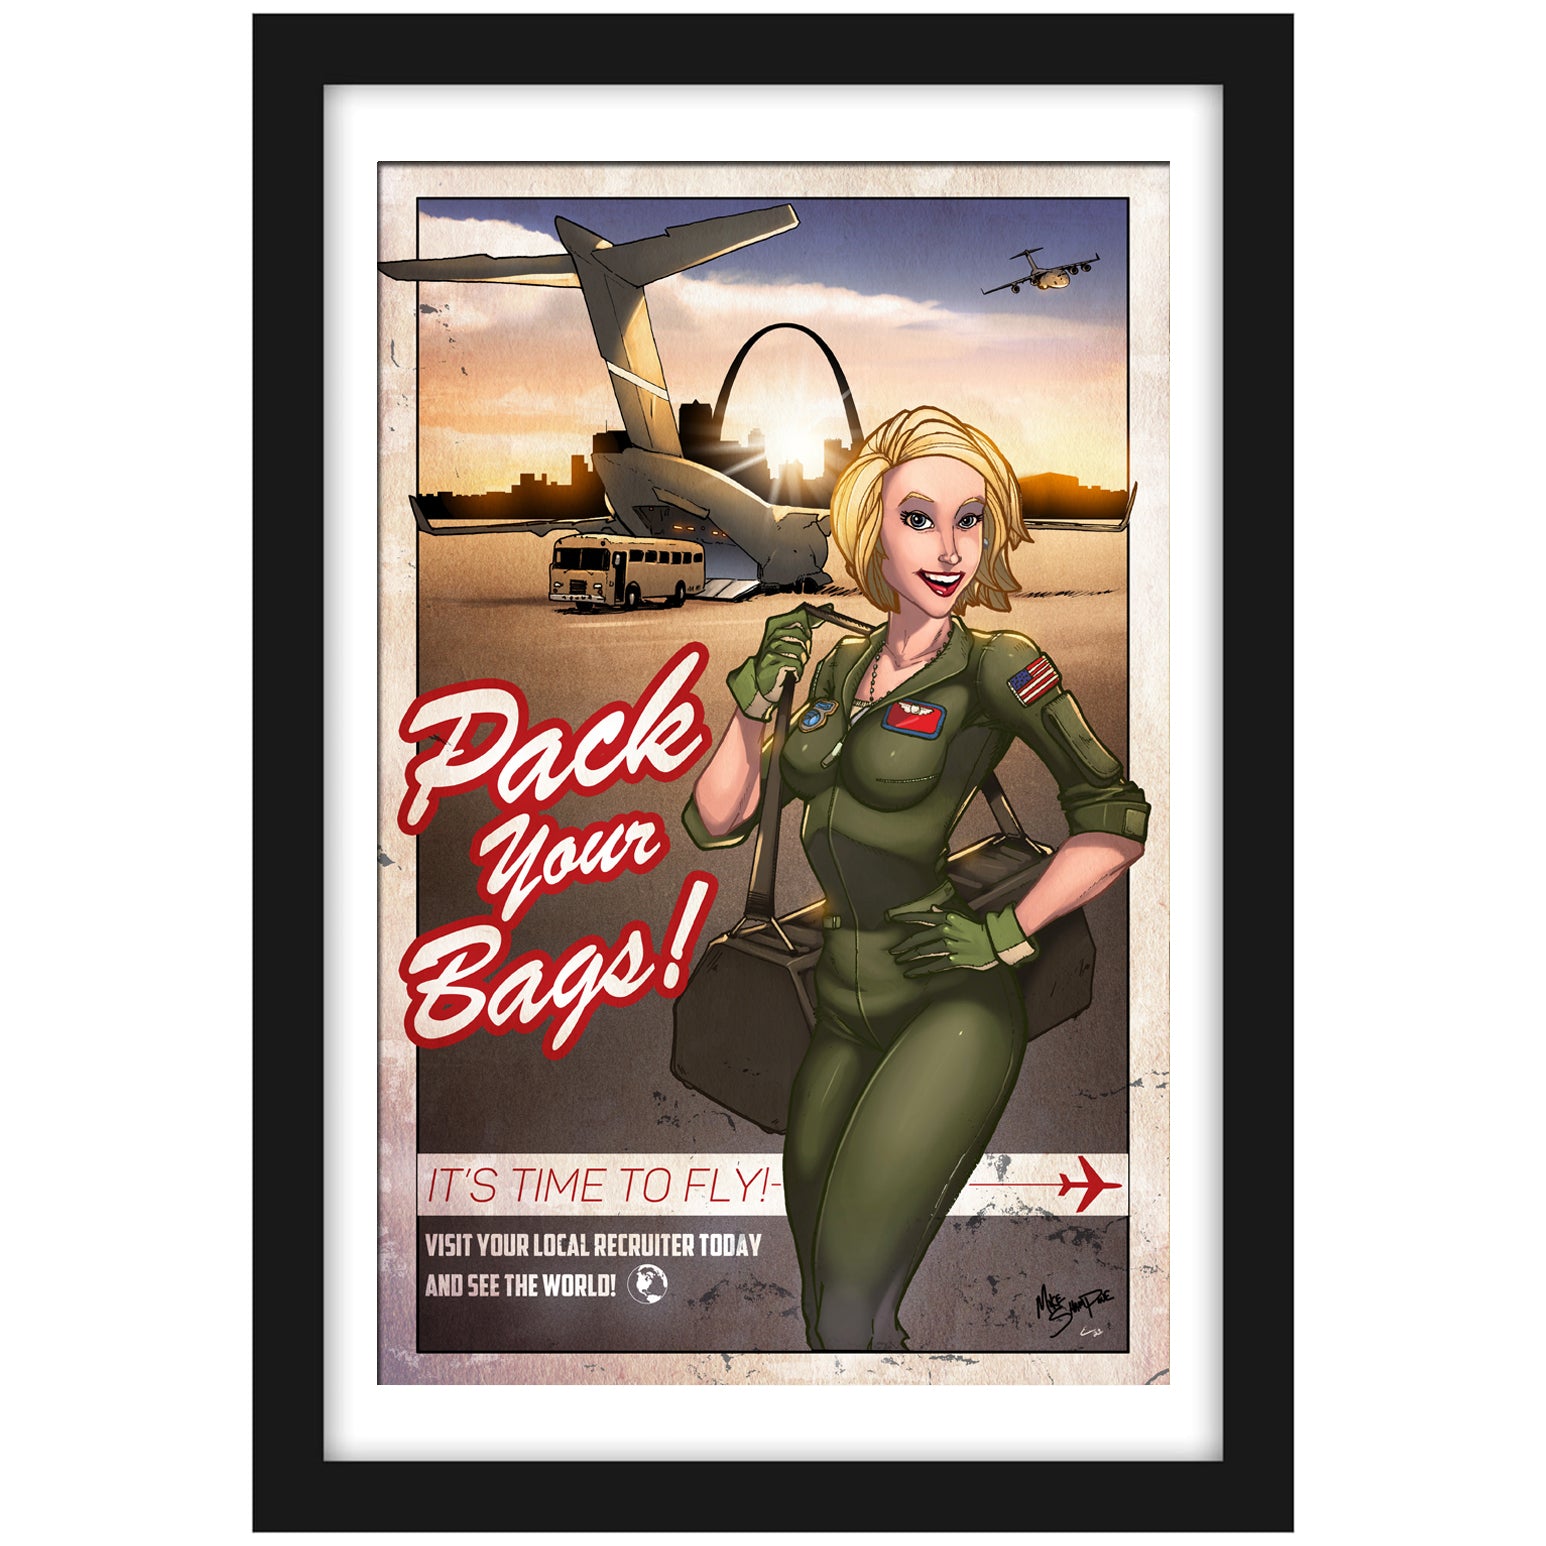 C-17 "Pack Your Bags" - Vintage Print Pinup & Airplane Art by Mike Shampine - Signed and Numbered